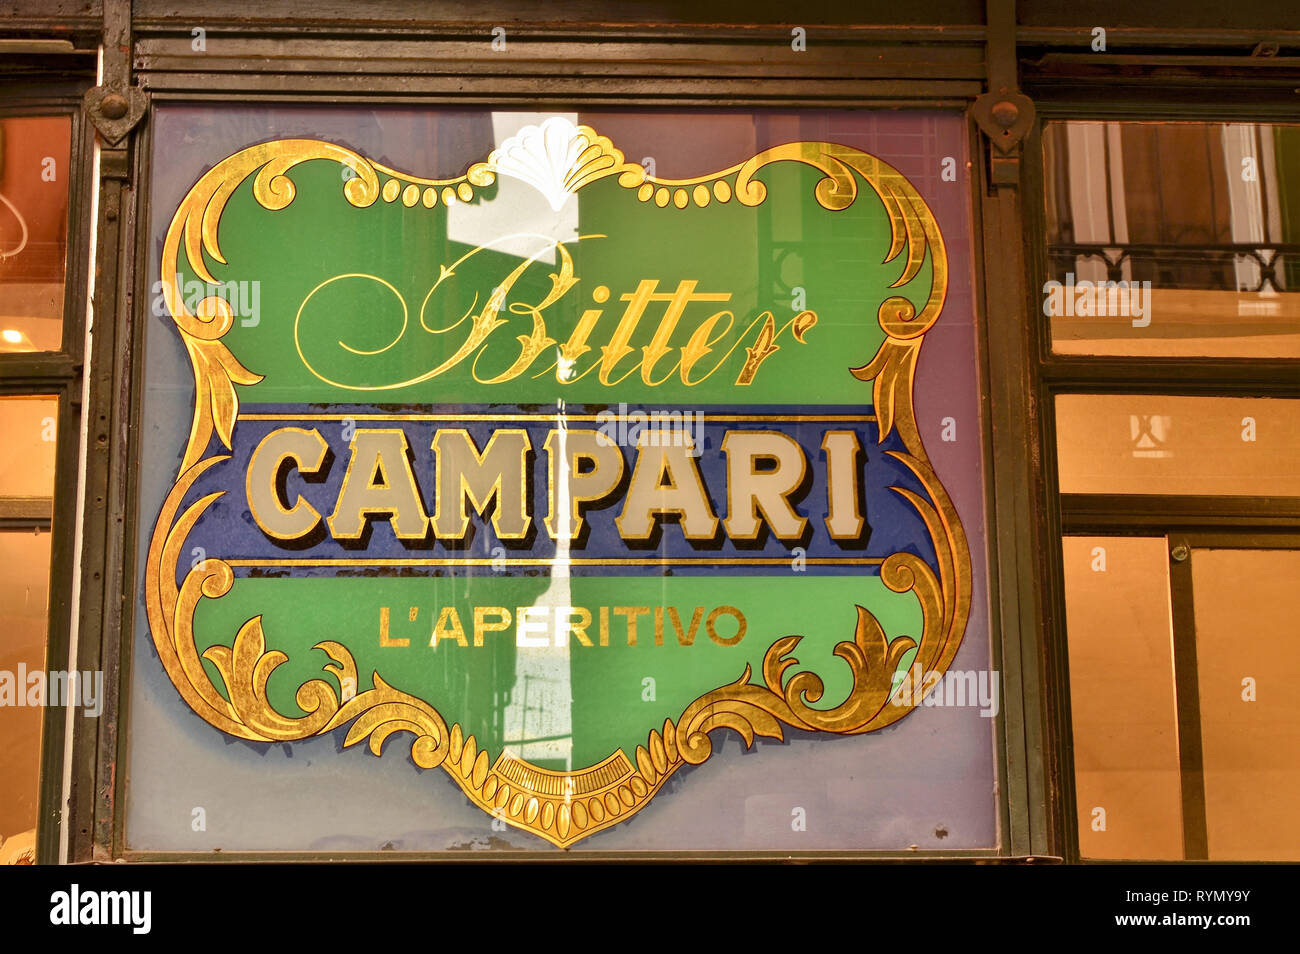 Verbania, Piedmont, Italy. March 2019. In the historic center, a vintage bar with vintage signs of the main drinking products. Stock Photo